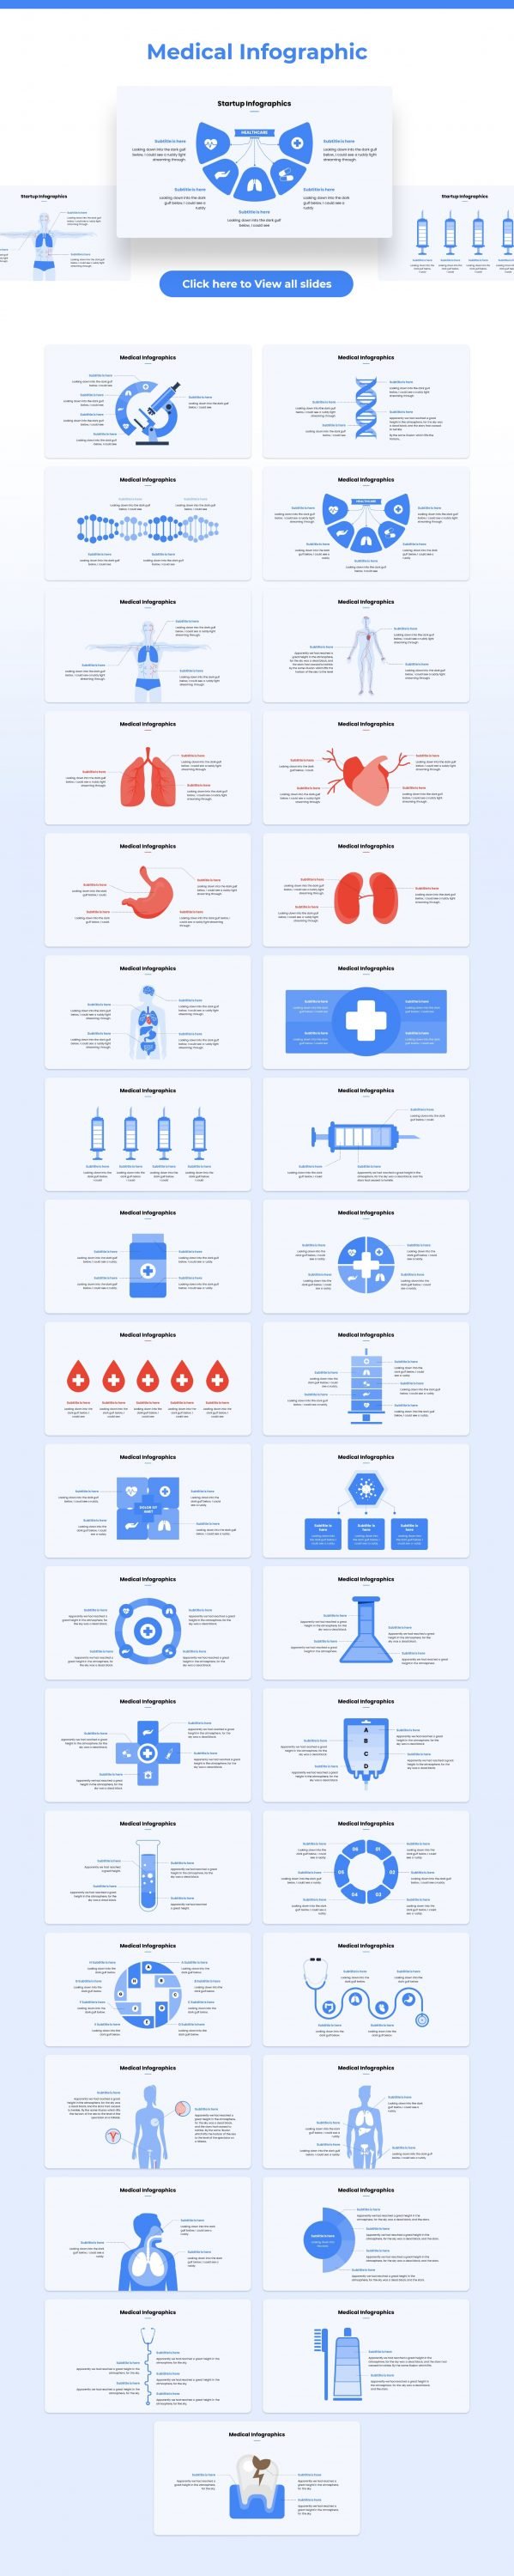 The last one - medical infographic in blue. This infographic features illustrative thematic drawings and elements.